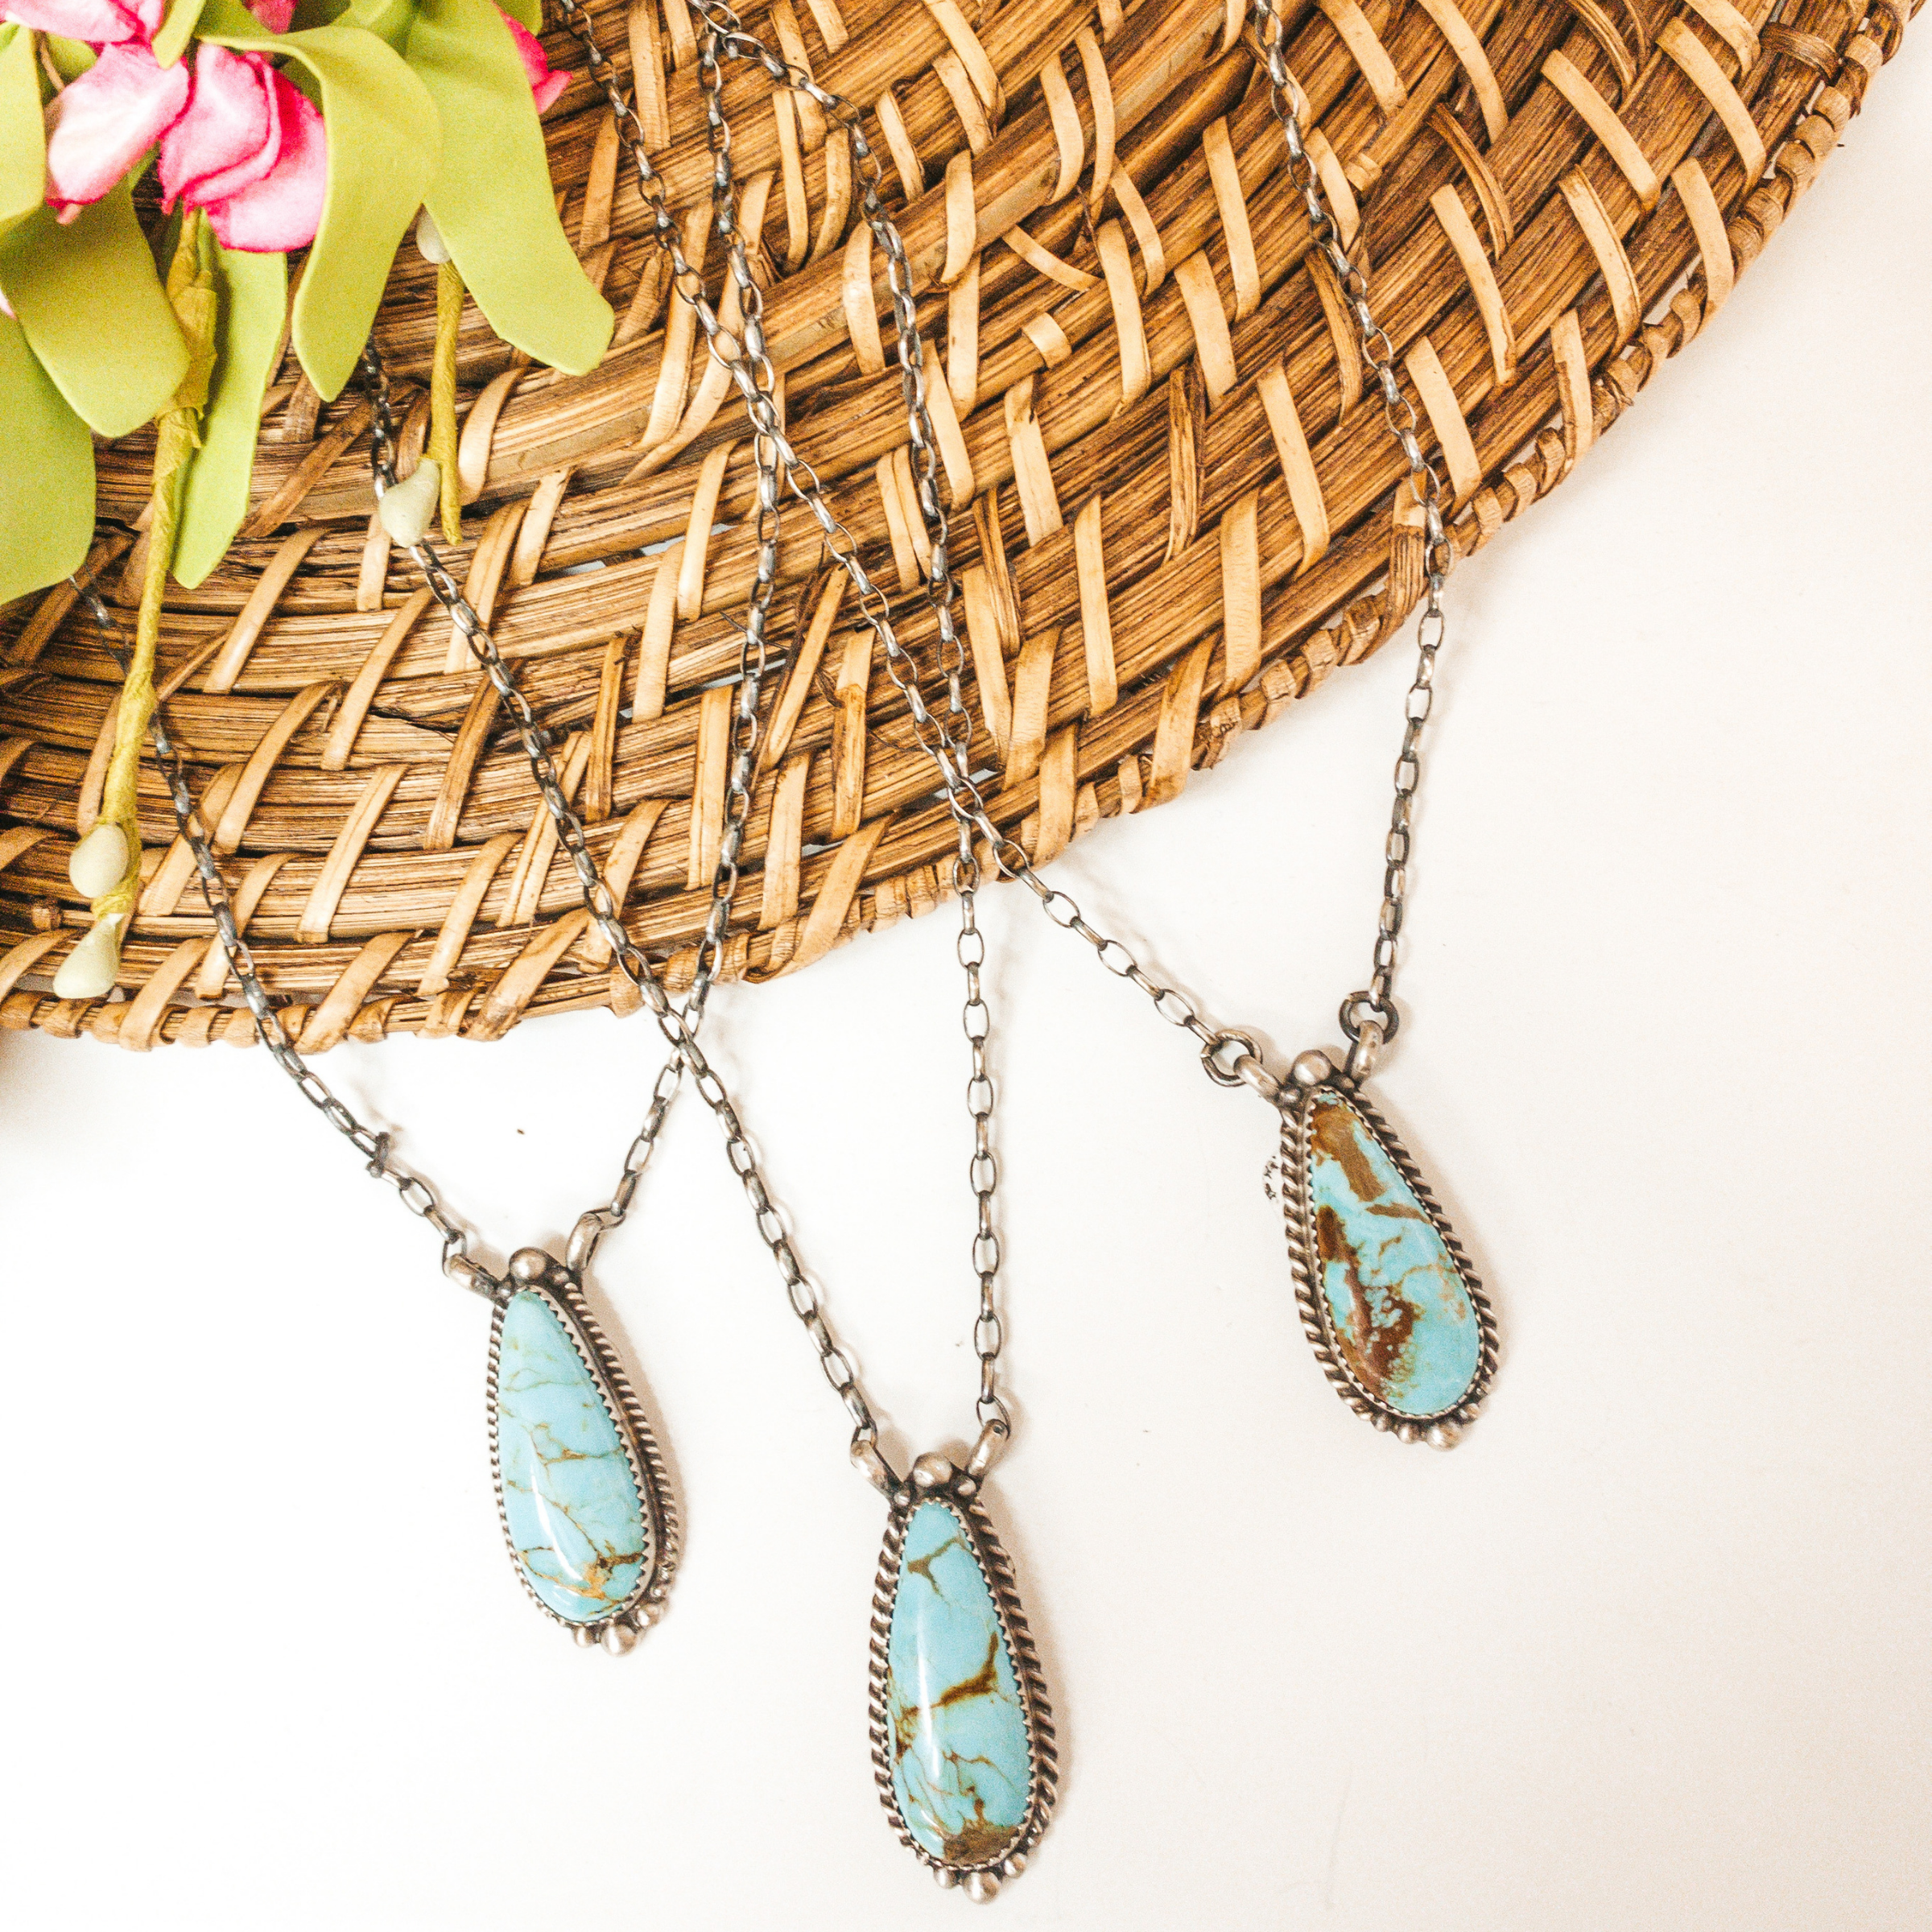 Elouise Kee | Navajo Handmade Sterling Silver Chain Necklace with Teardrop Kingman Turquoise Pendant - Giddy Up Glamour Boutique